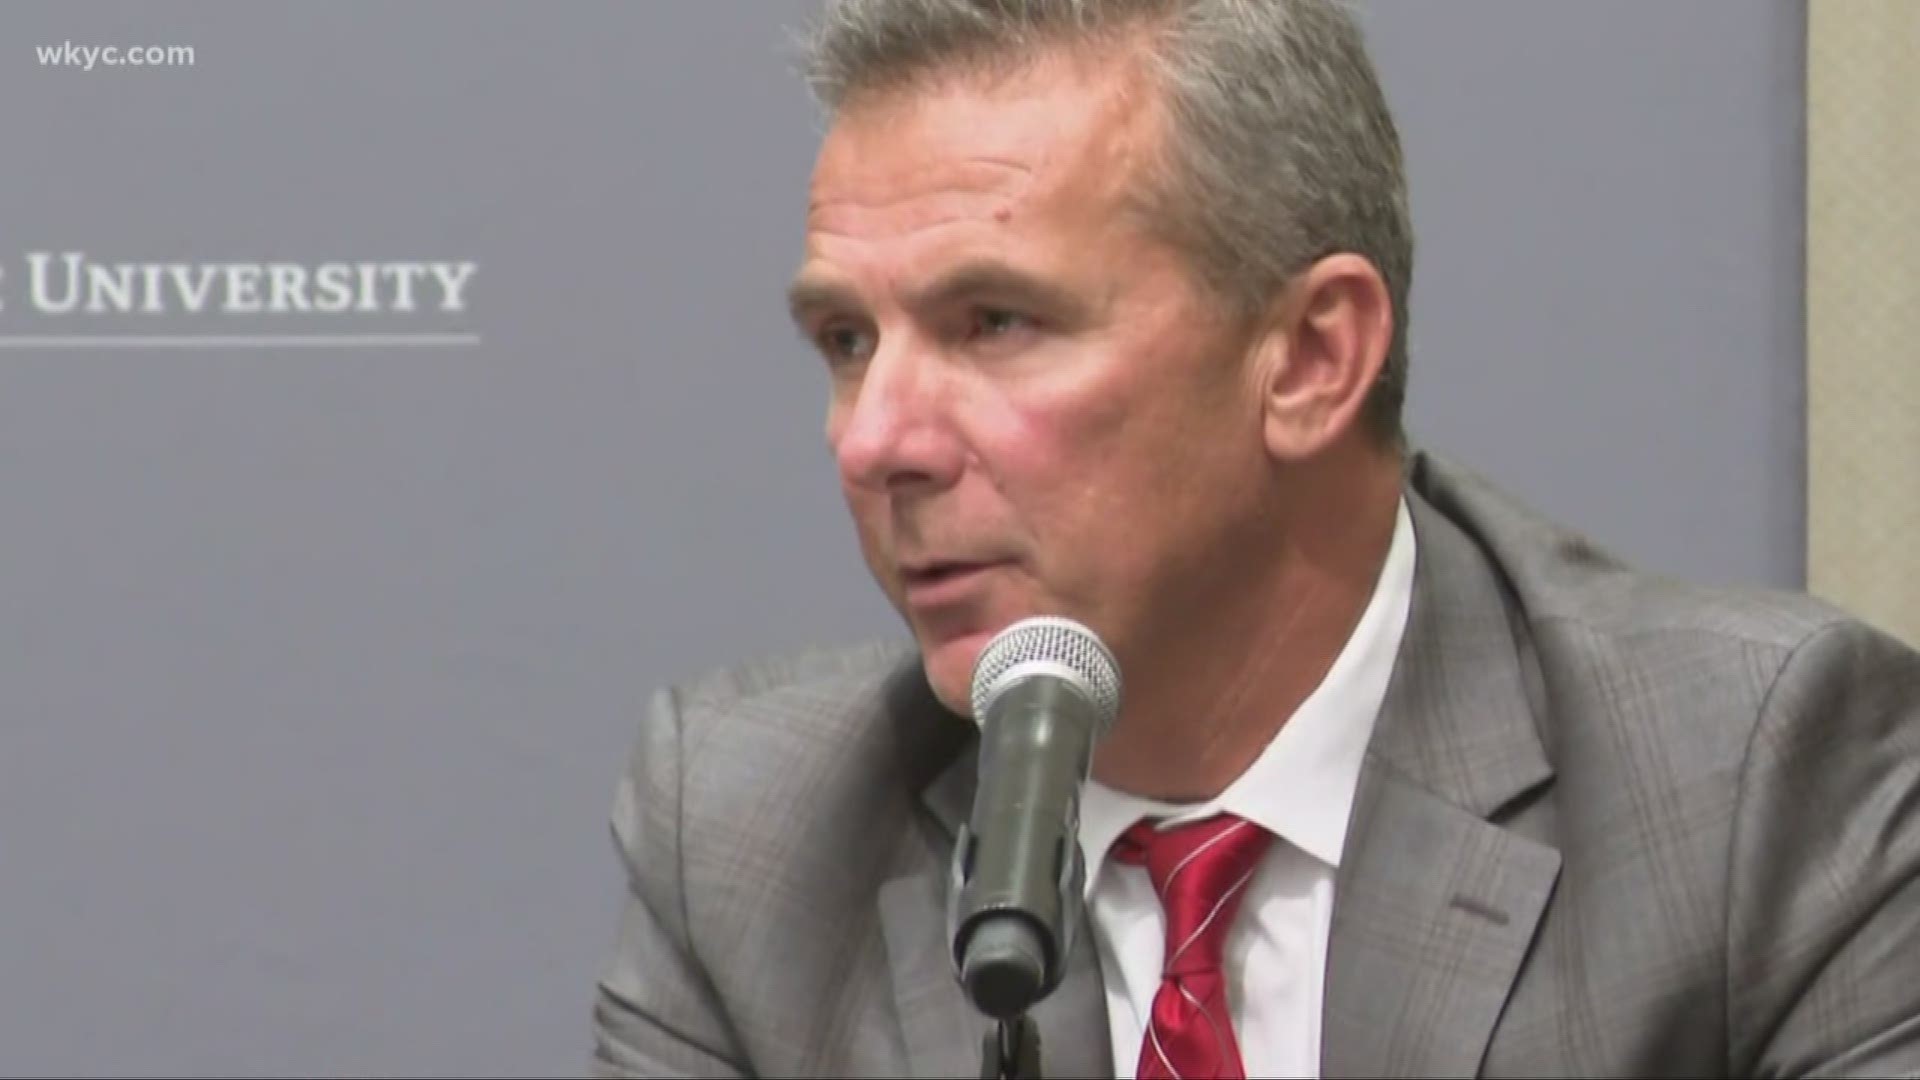 What's next for Ohio State's football team after Urban Meyer suspension?